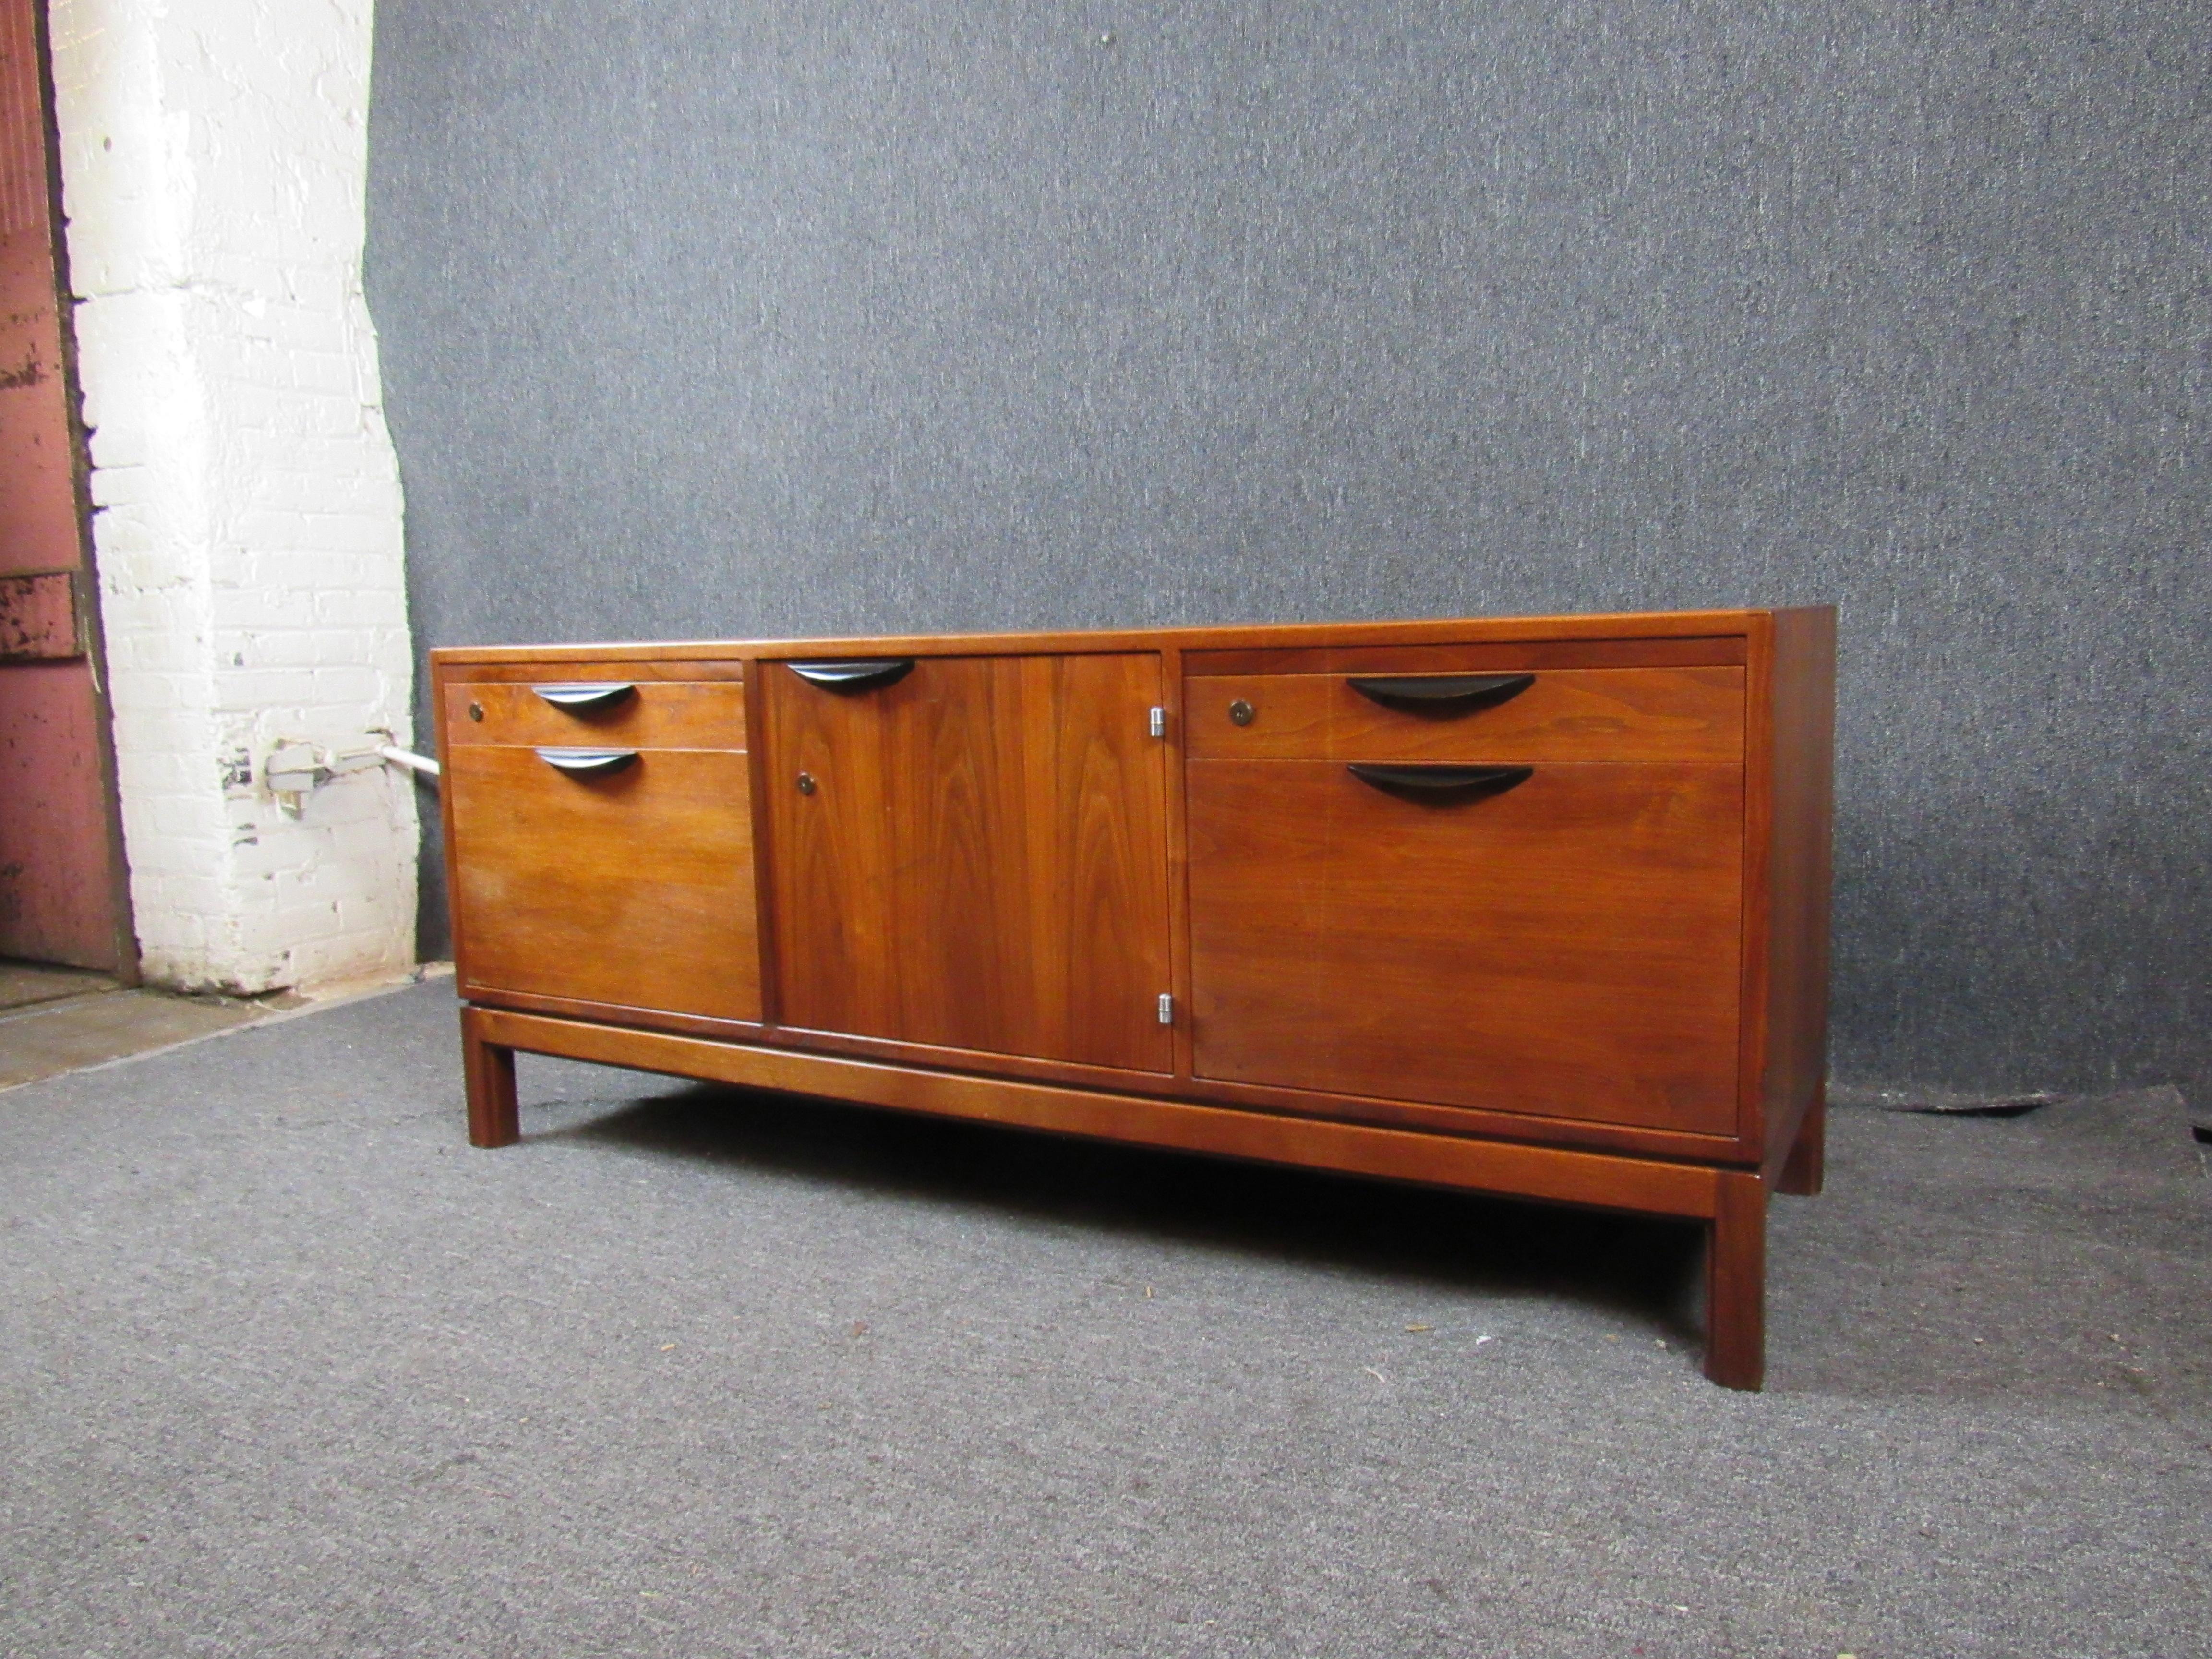 Gorgeous sideboard designed by one of the pioneers of mid-century furniture design, Jens Risom. Fine wood grain and bold lines come together in a sideboard that is equal parts beauty and utility. Four pull-out side drawers and a large center cabinet